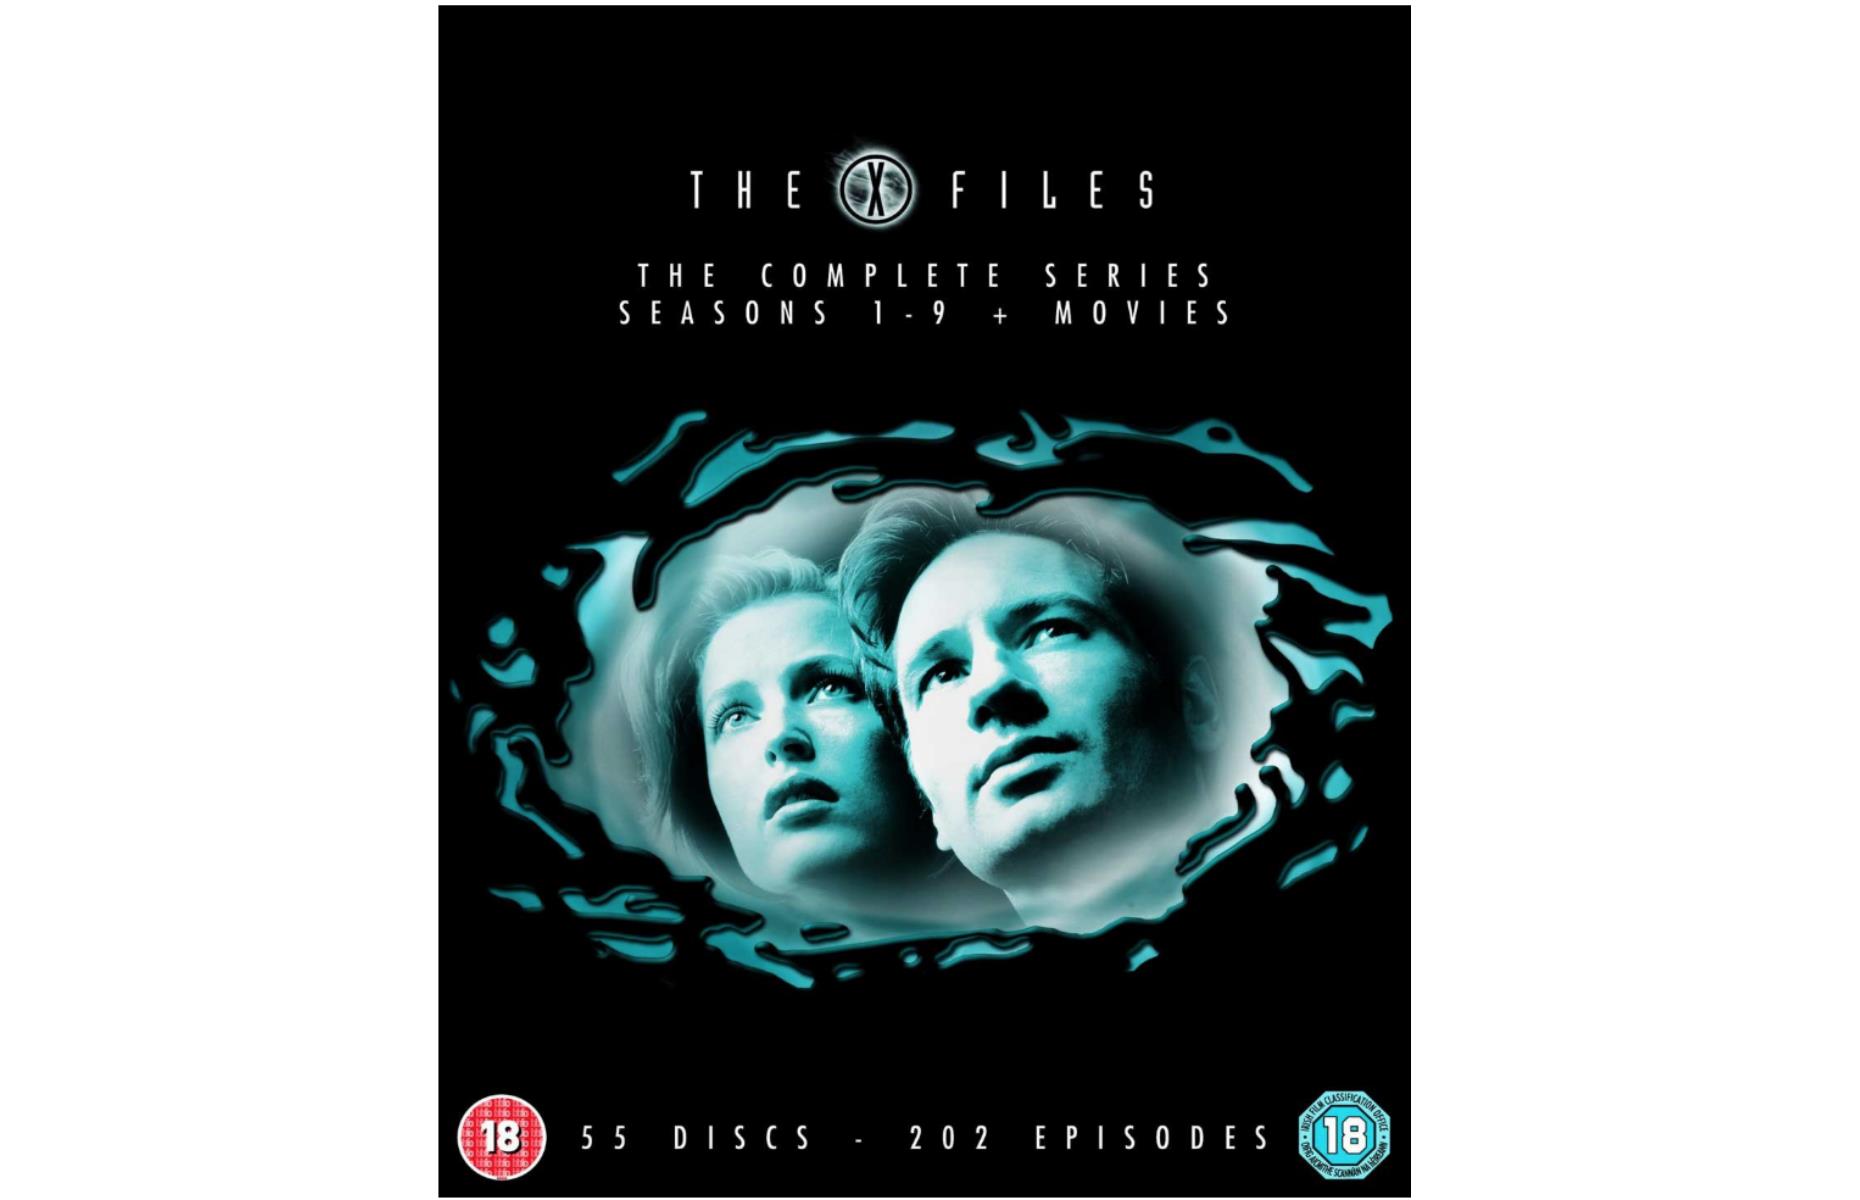 The X Files: Complete Season 1-9 DVD Box Set – up to $127 (£100)